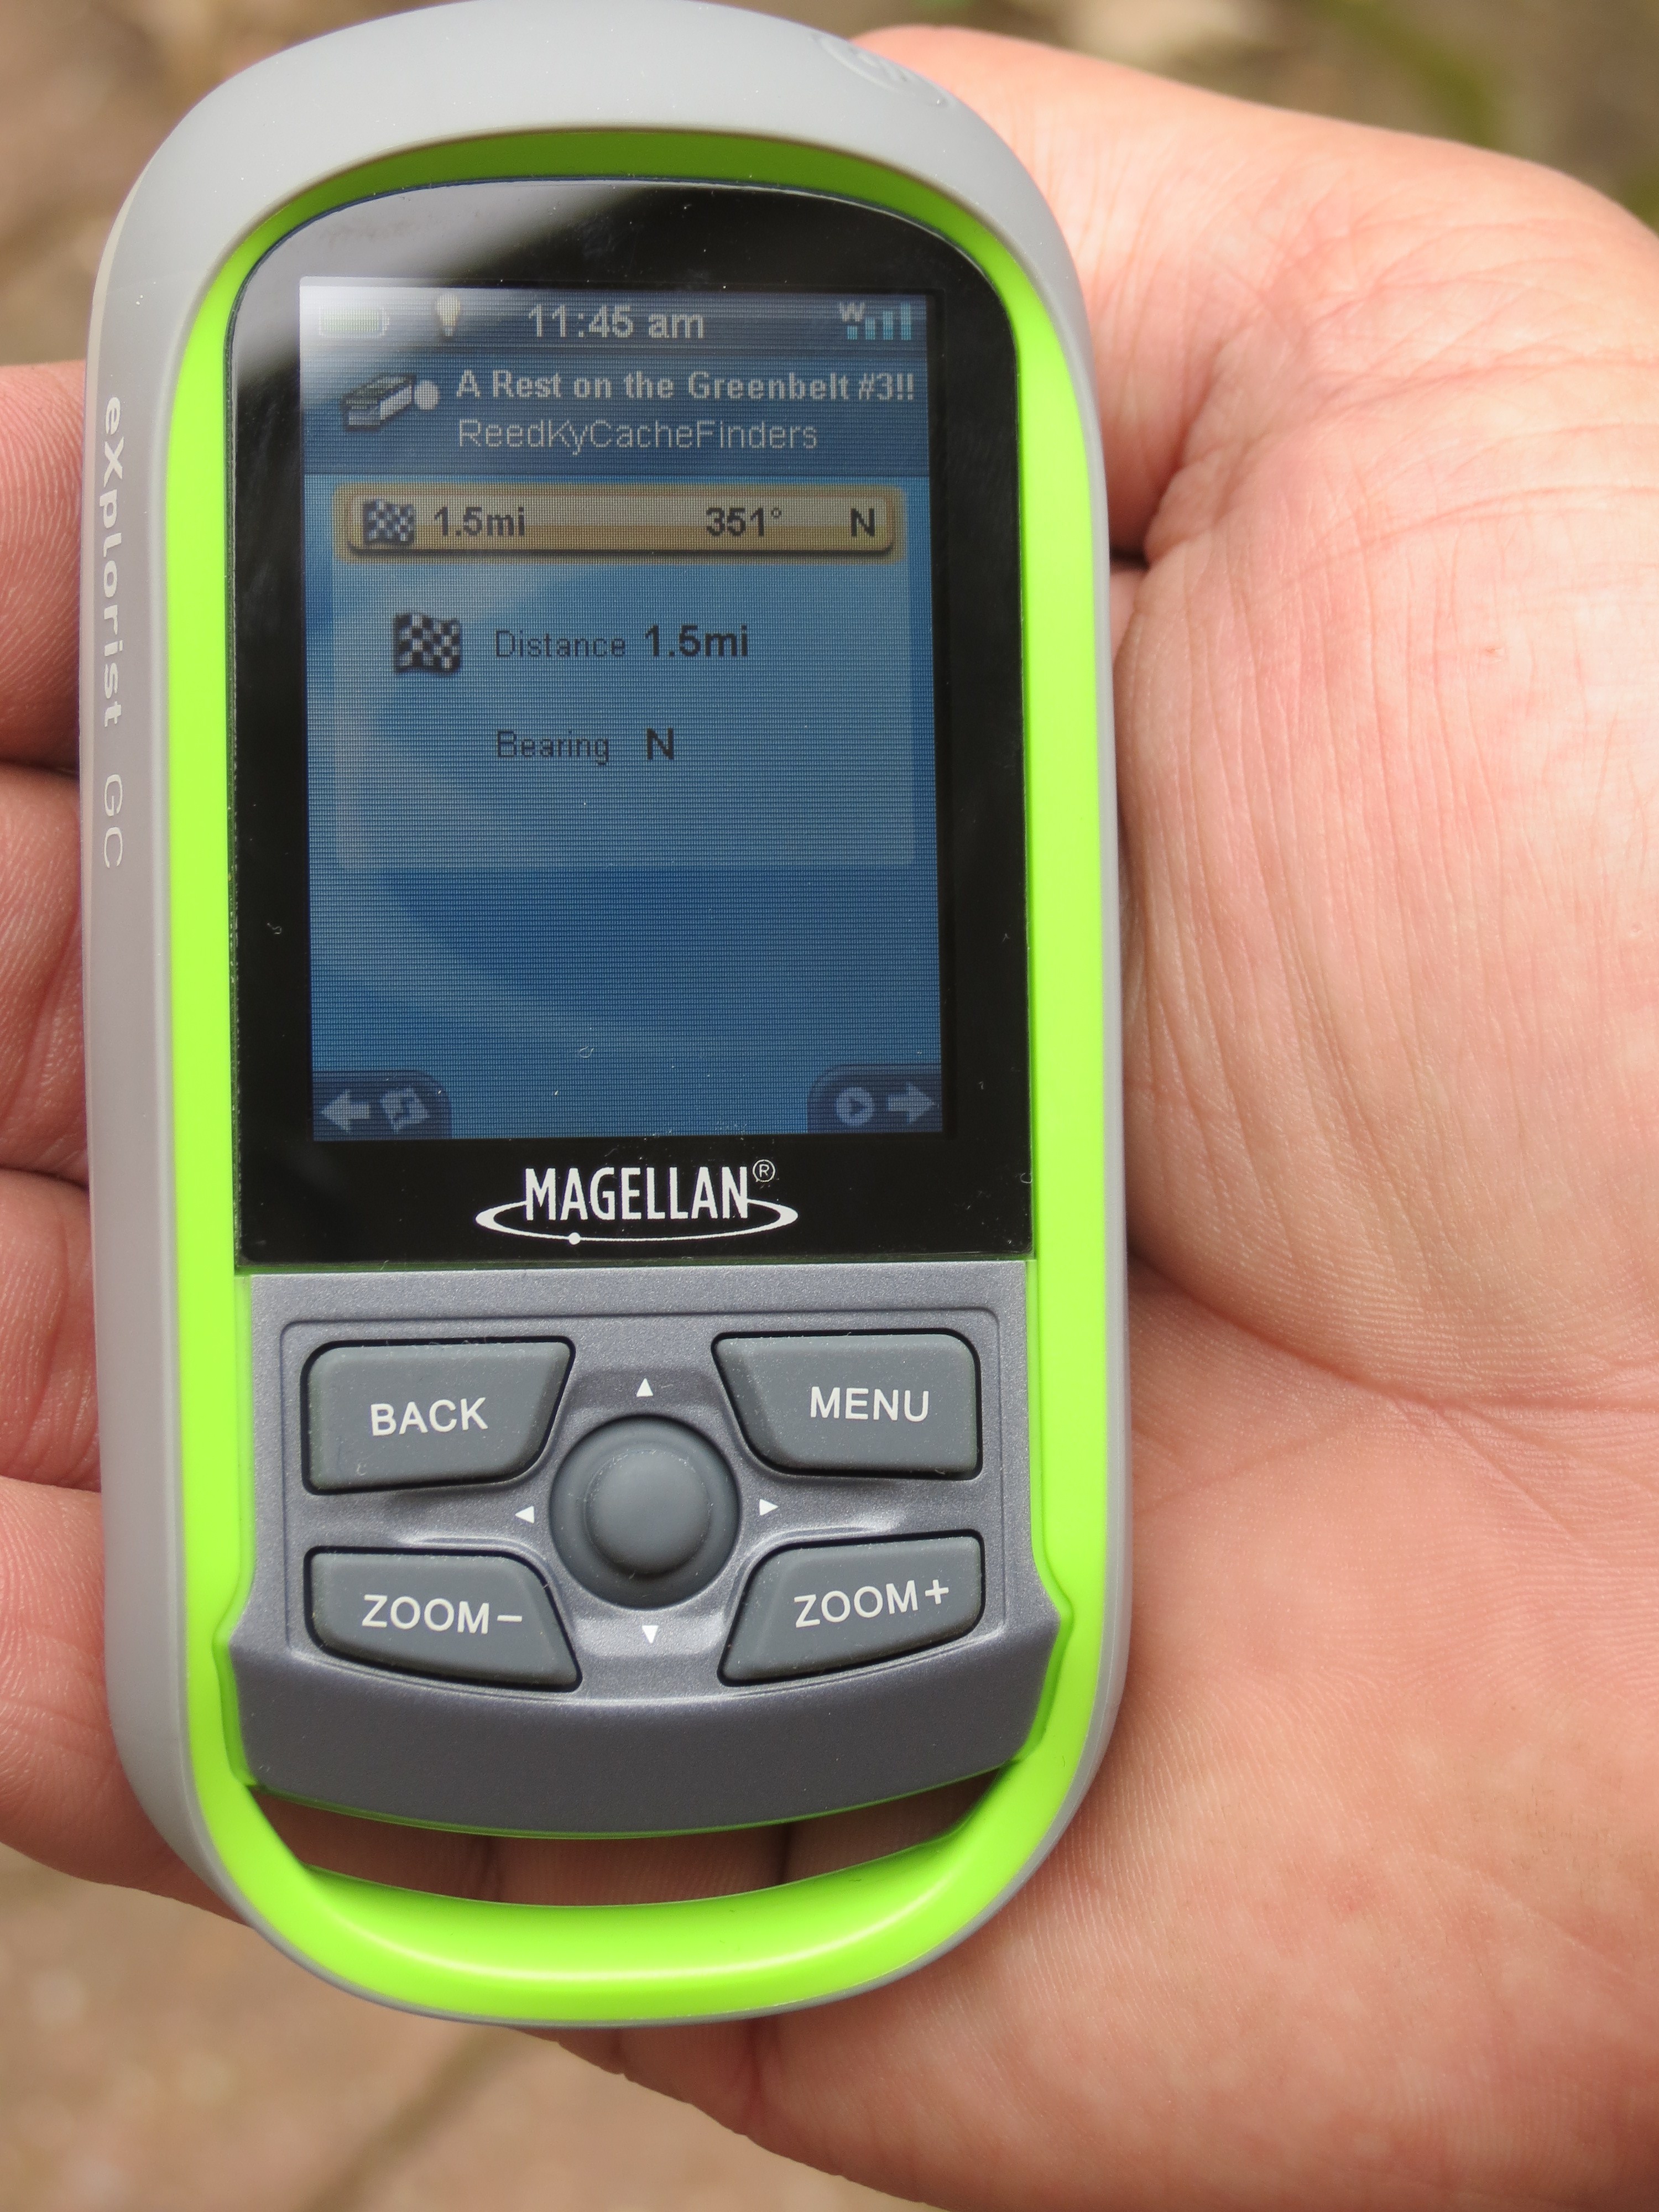 How to download geo caches to magellan explorist gc